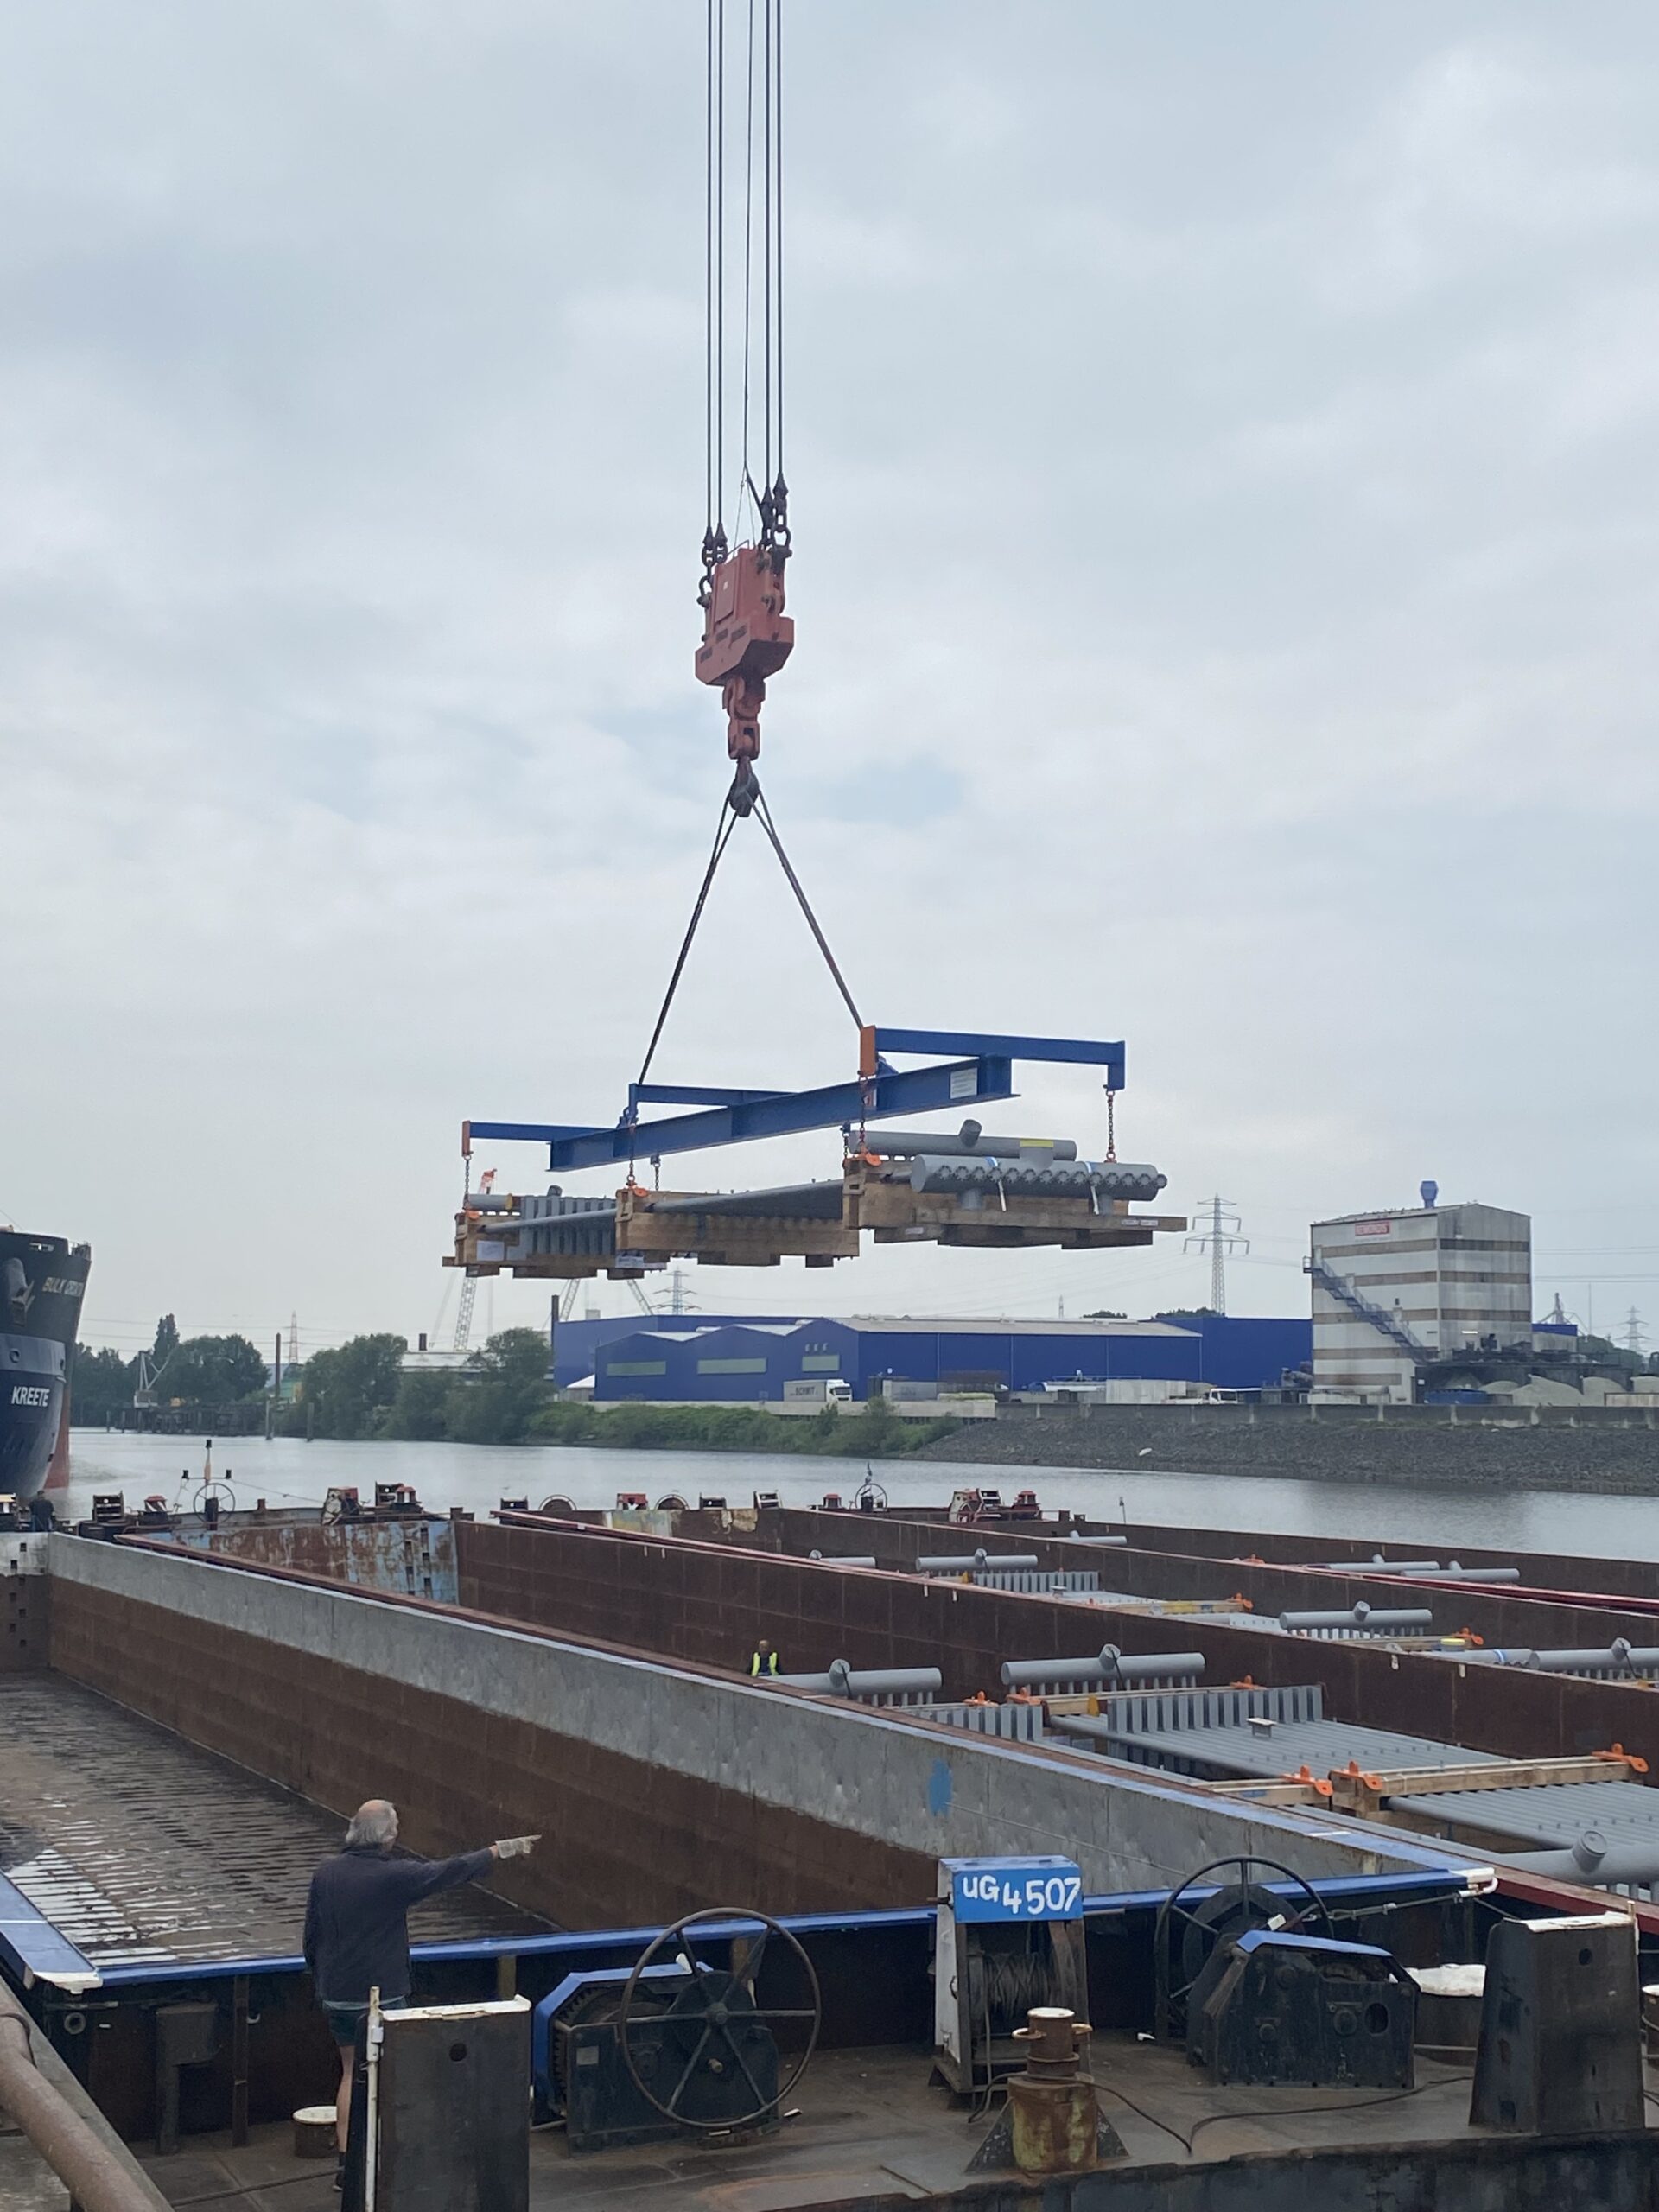 FOB Hamburg for India by fleet of barges